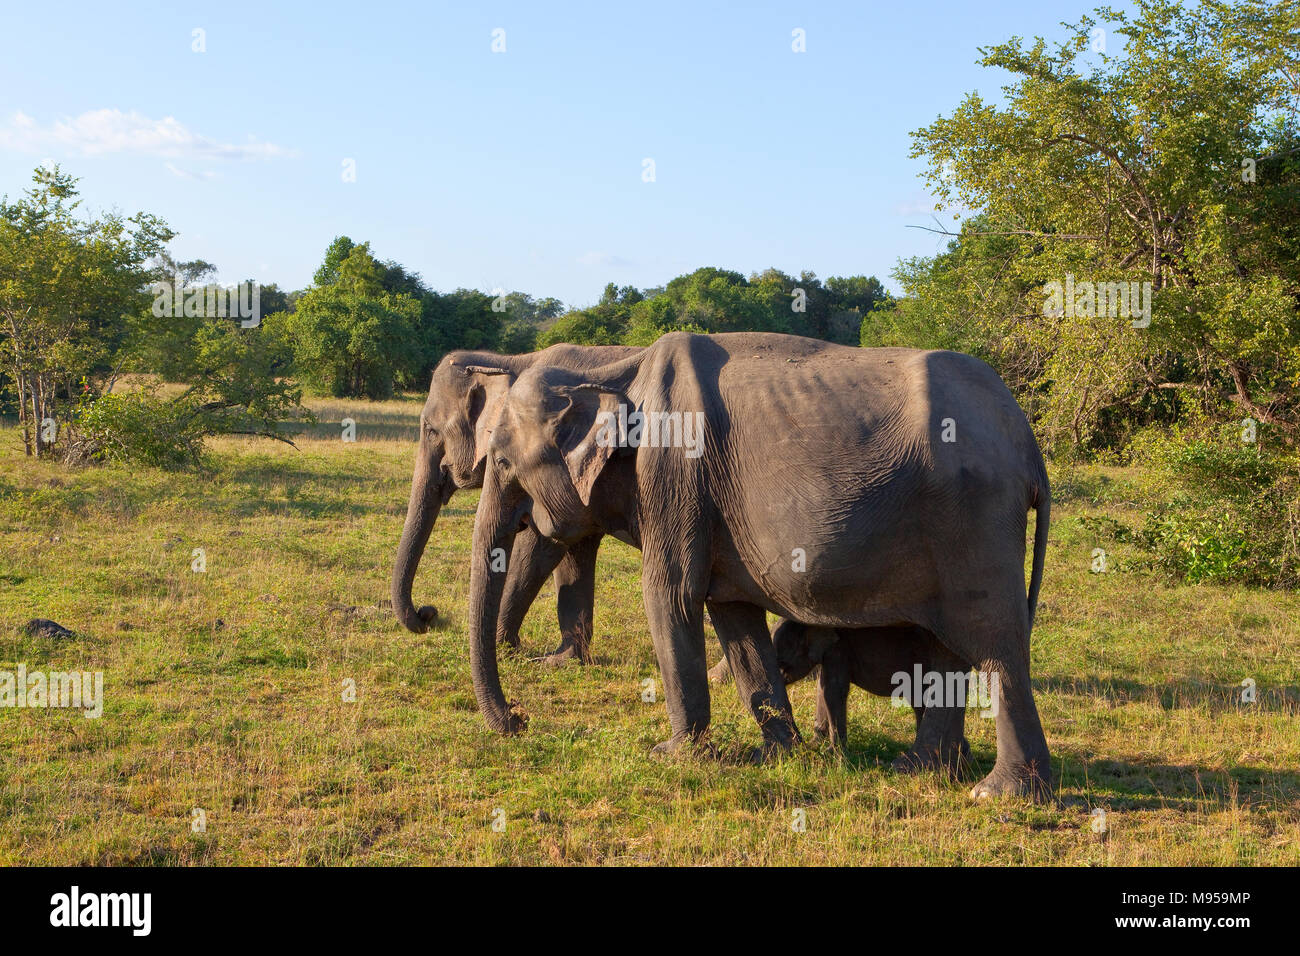 a sri lankan elephant family at wasgamuwa national park with tropical forest and open grassland under a blue sky Stock Photo